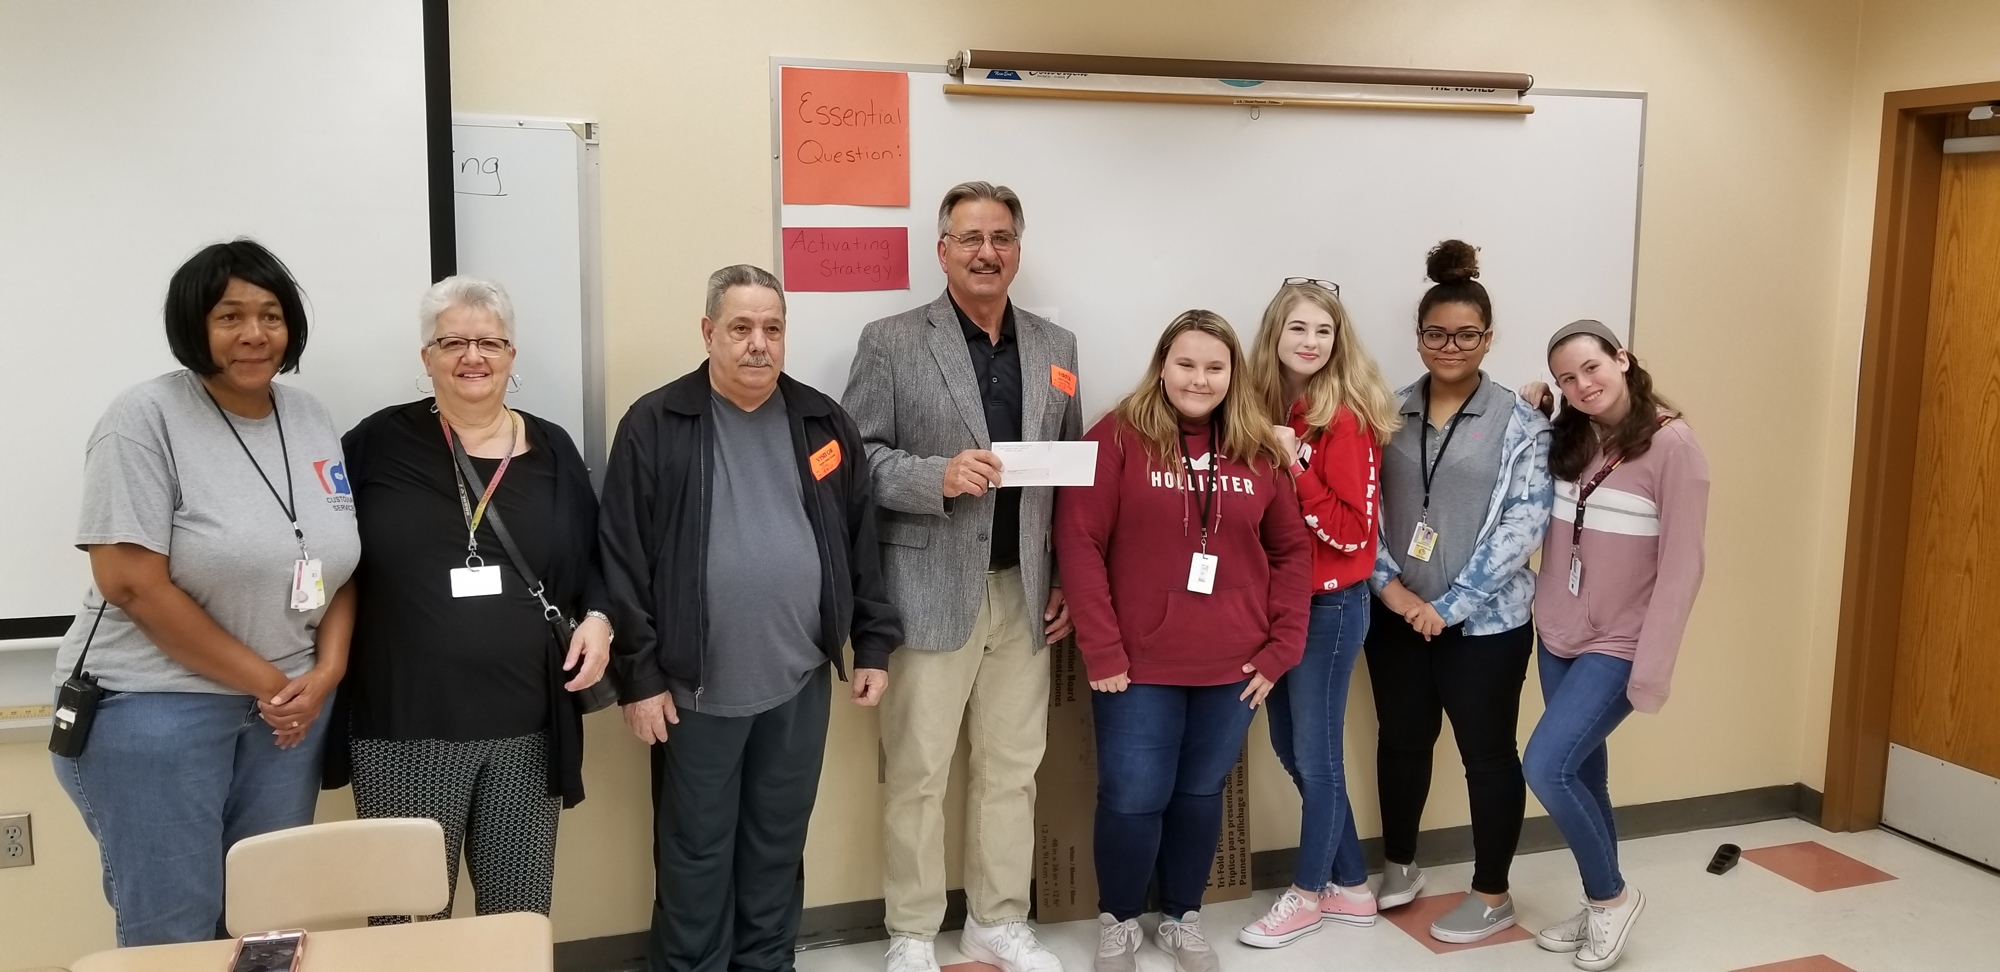 Melinda Myles, Dottie Colletta, Sam Colletta, Pastor Charles Silano, students Lexis Angel, Charlotte Flechter, Genesis Santiago and Rylee Stives. Students not pictured: Paisley Armstrong, Julietta Kauffmann and Sadieth Tarr.